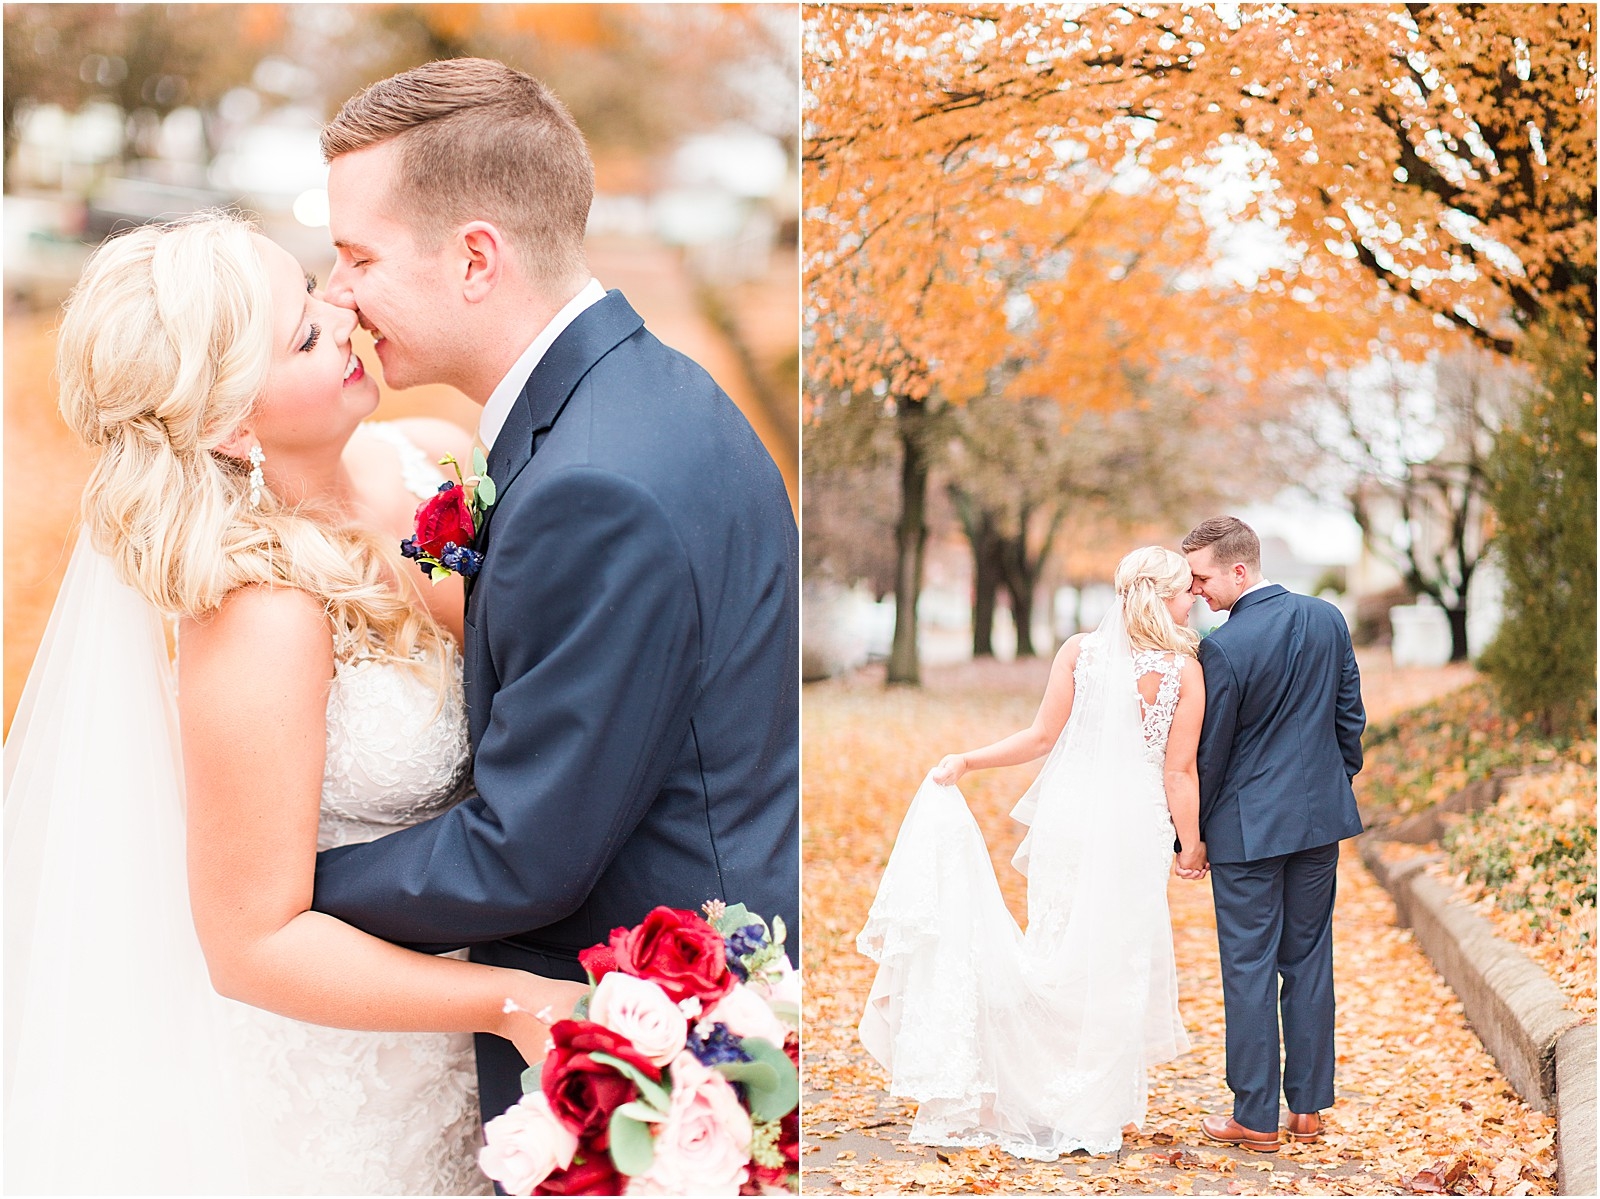 Haylee and Dillon's Evansville, Indiana wedding by Bret and Brandie Photography.0072.jpg